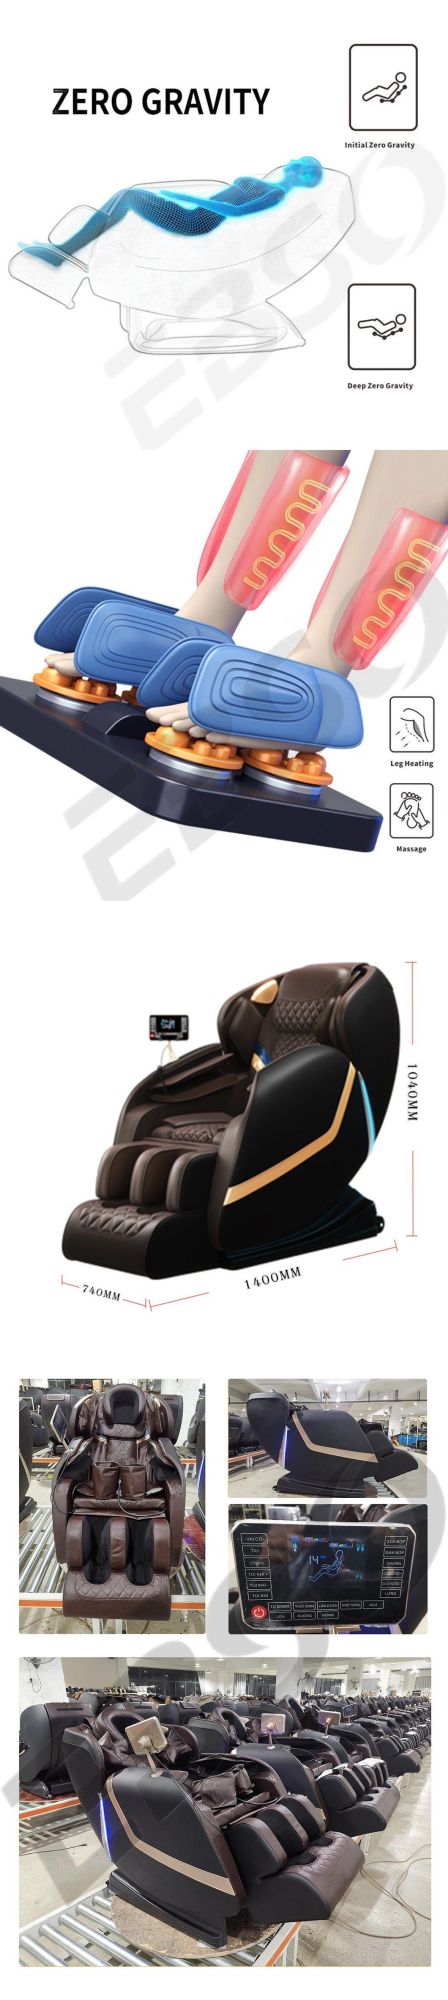 Hot Sale OEM/ODM Professional Electric Full Body Zero Gravity Compact Massage Chair Wholesale